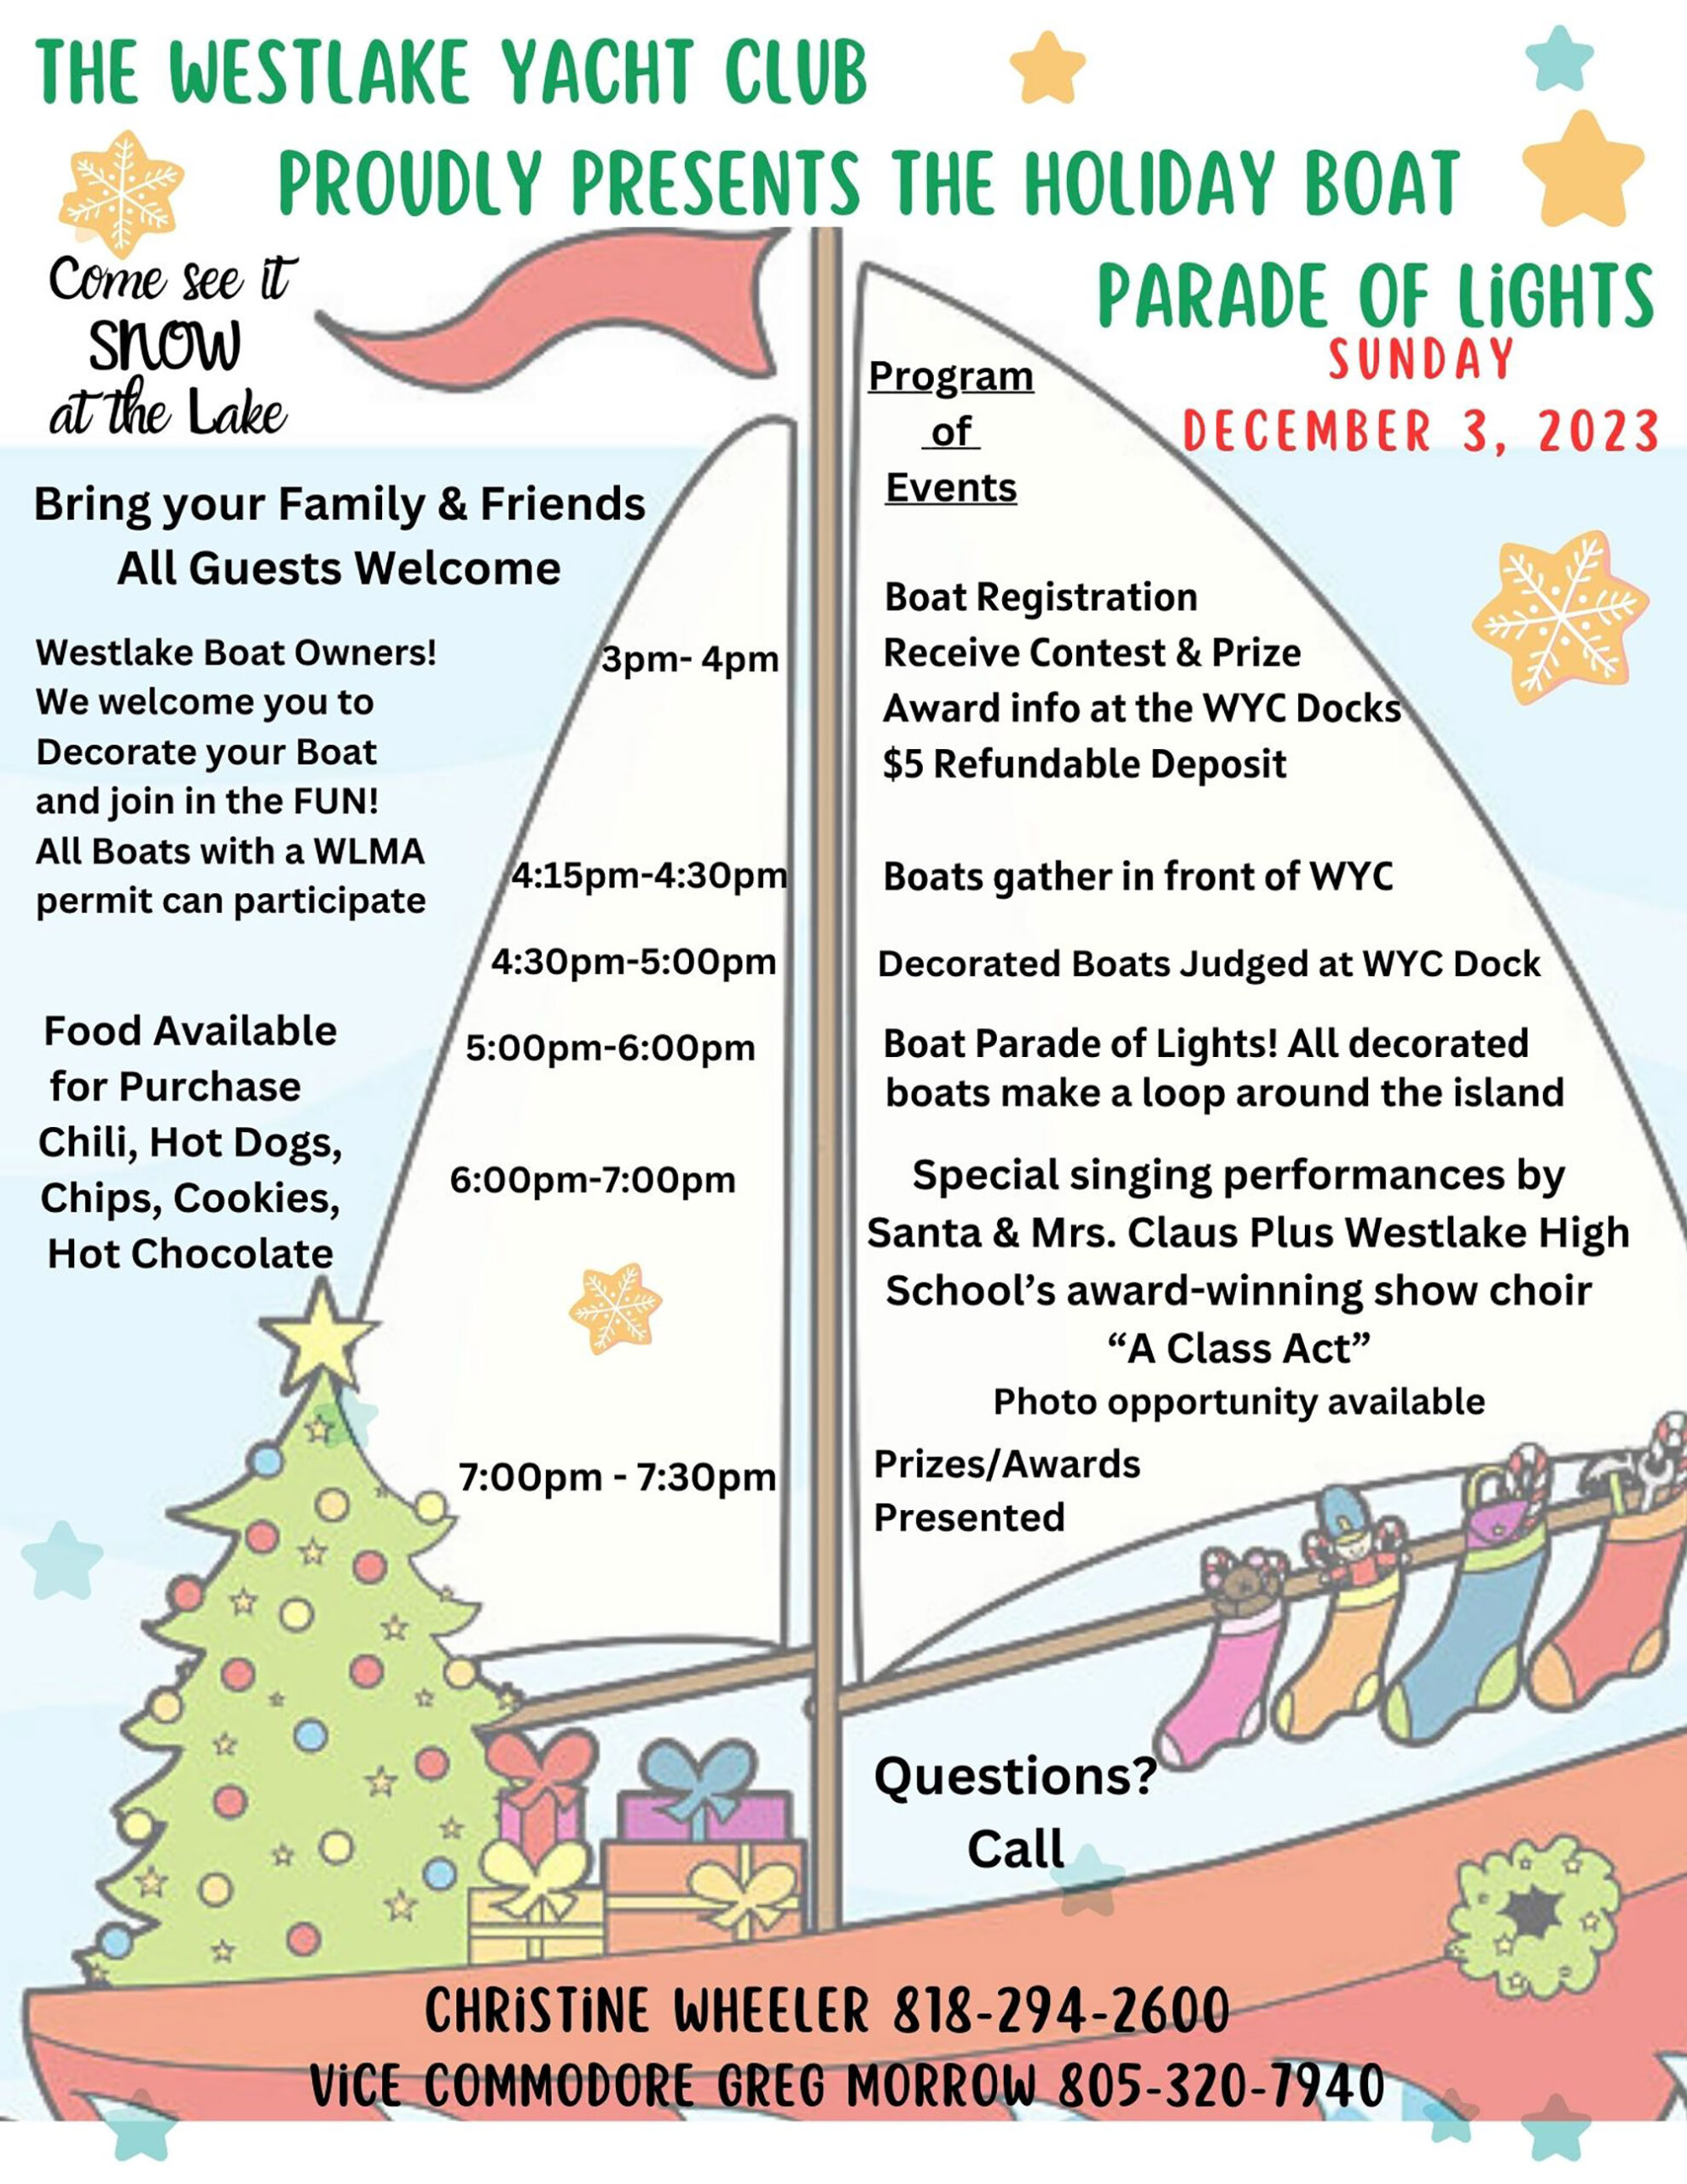 Official 2023 WYC Holiday Boat Parade of Lights poster